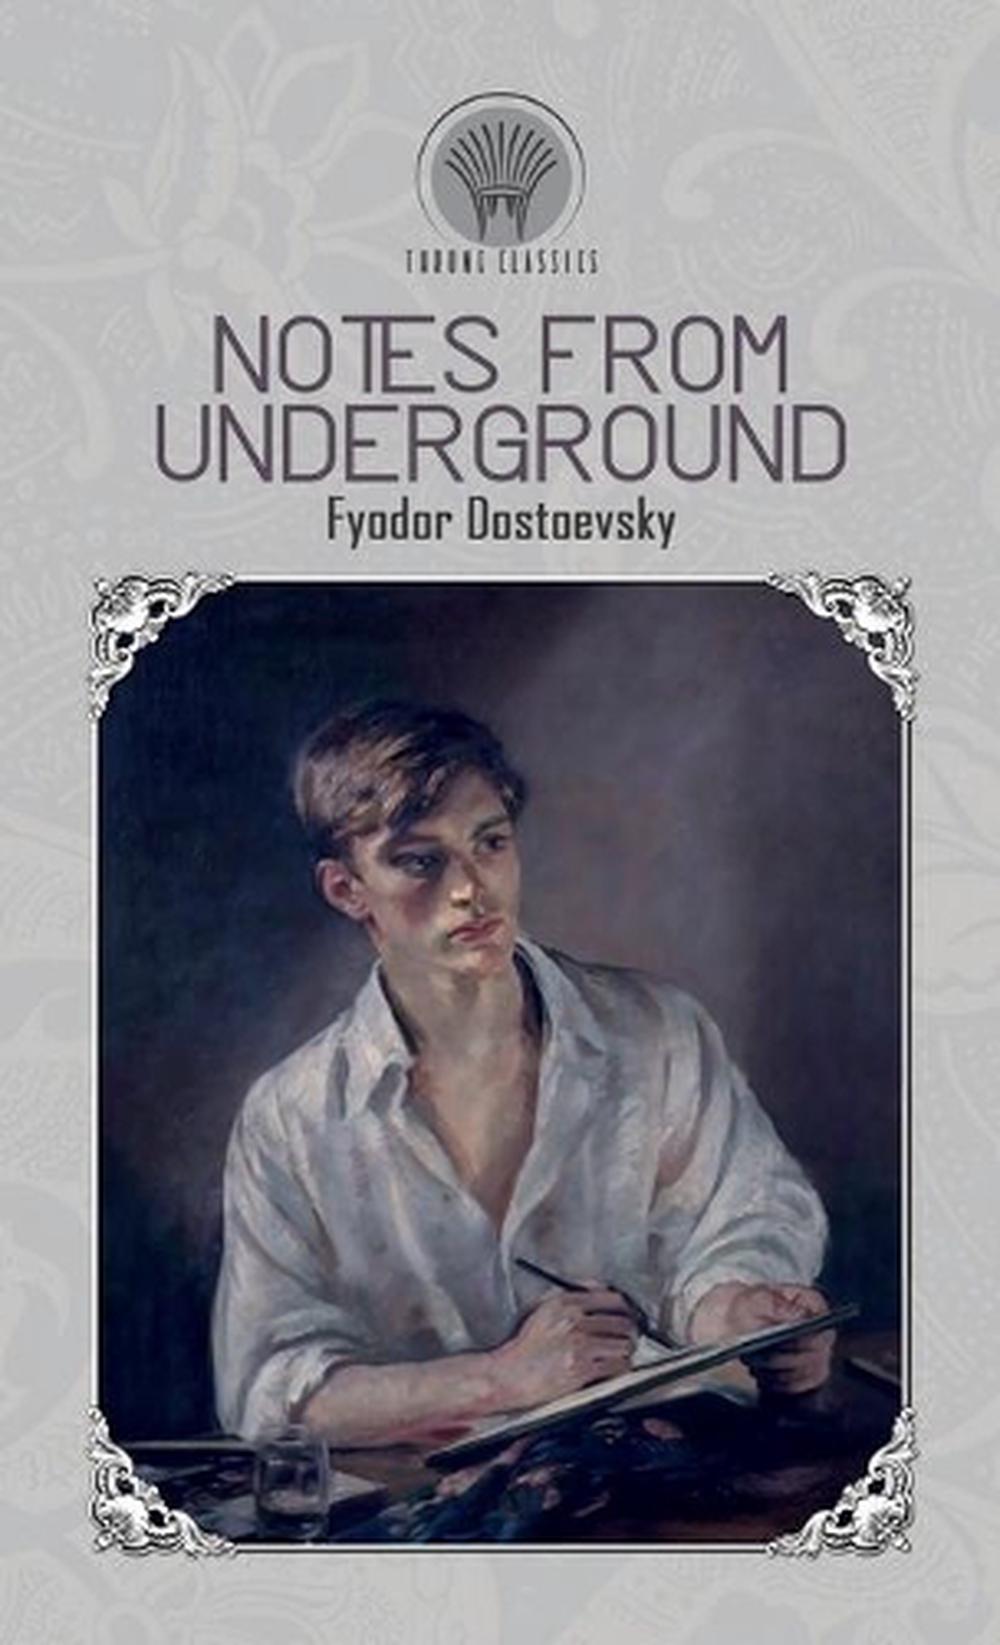 Notes from Underground by Stephen Duncombe